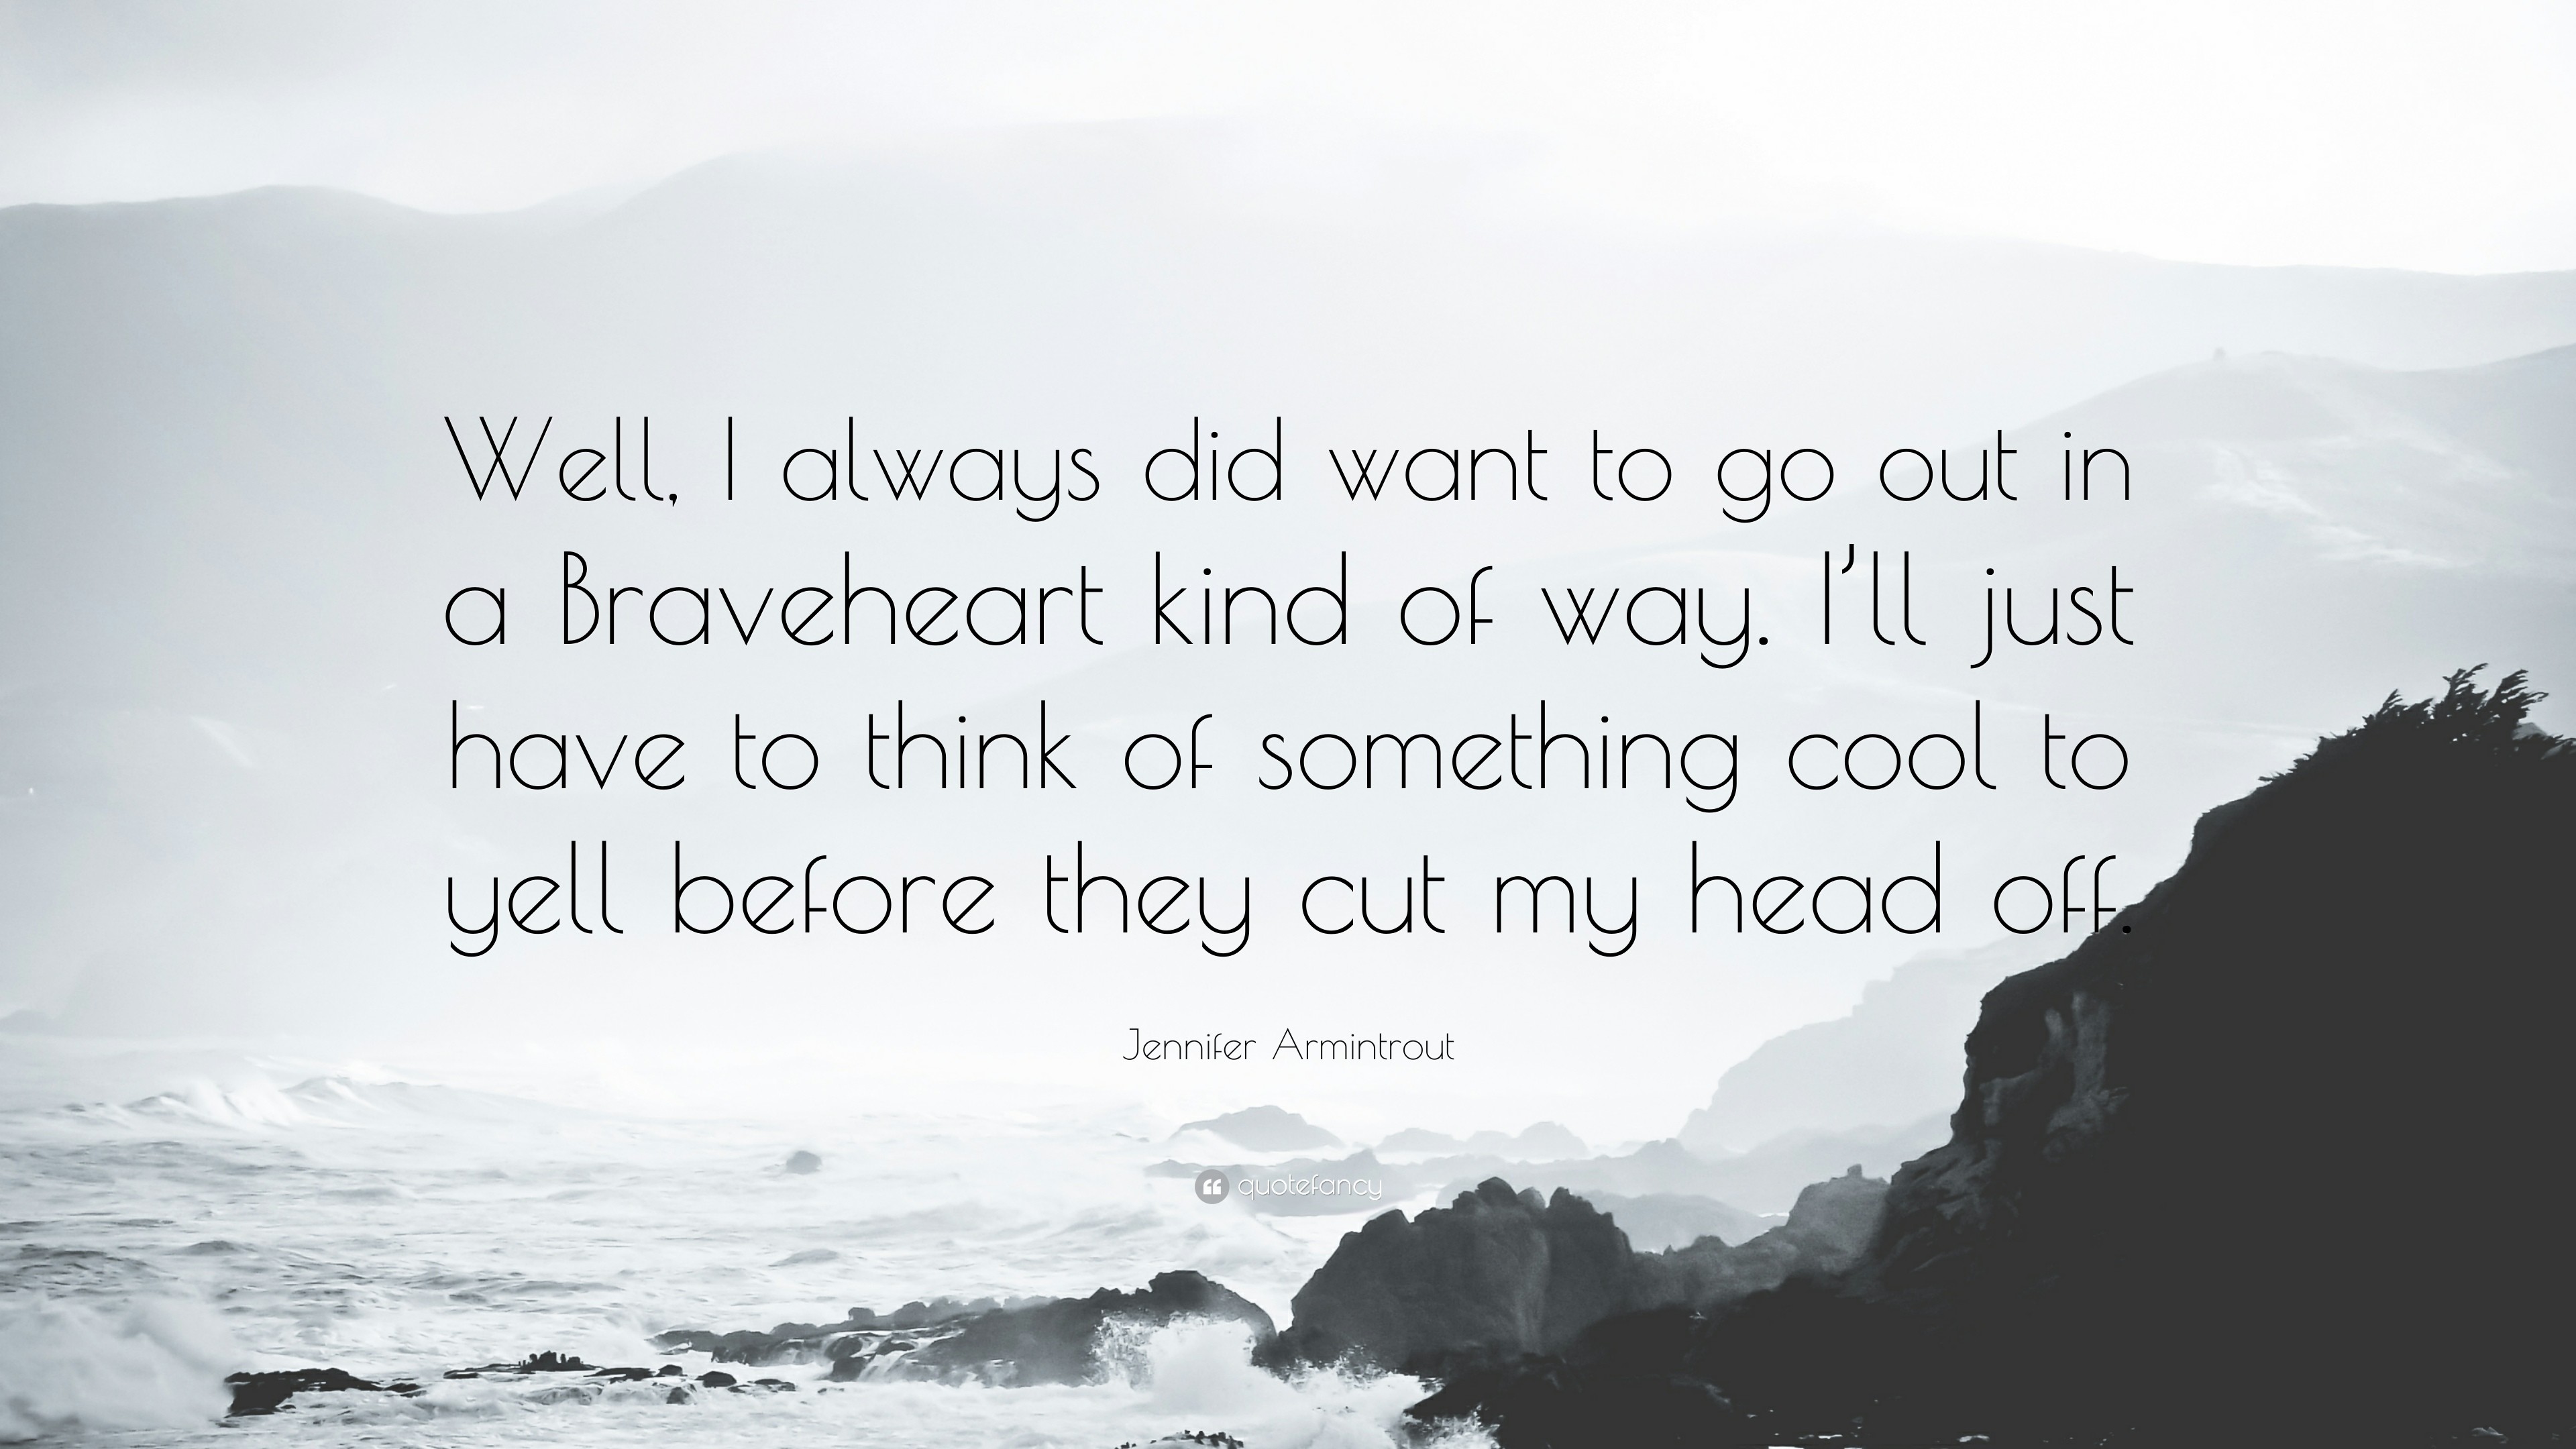 3840x2160 Jennifer Armintrout Quote: “Well, I always did want to go out in a